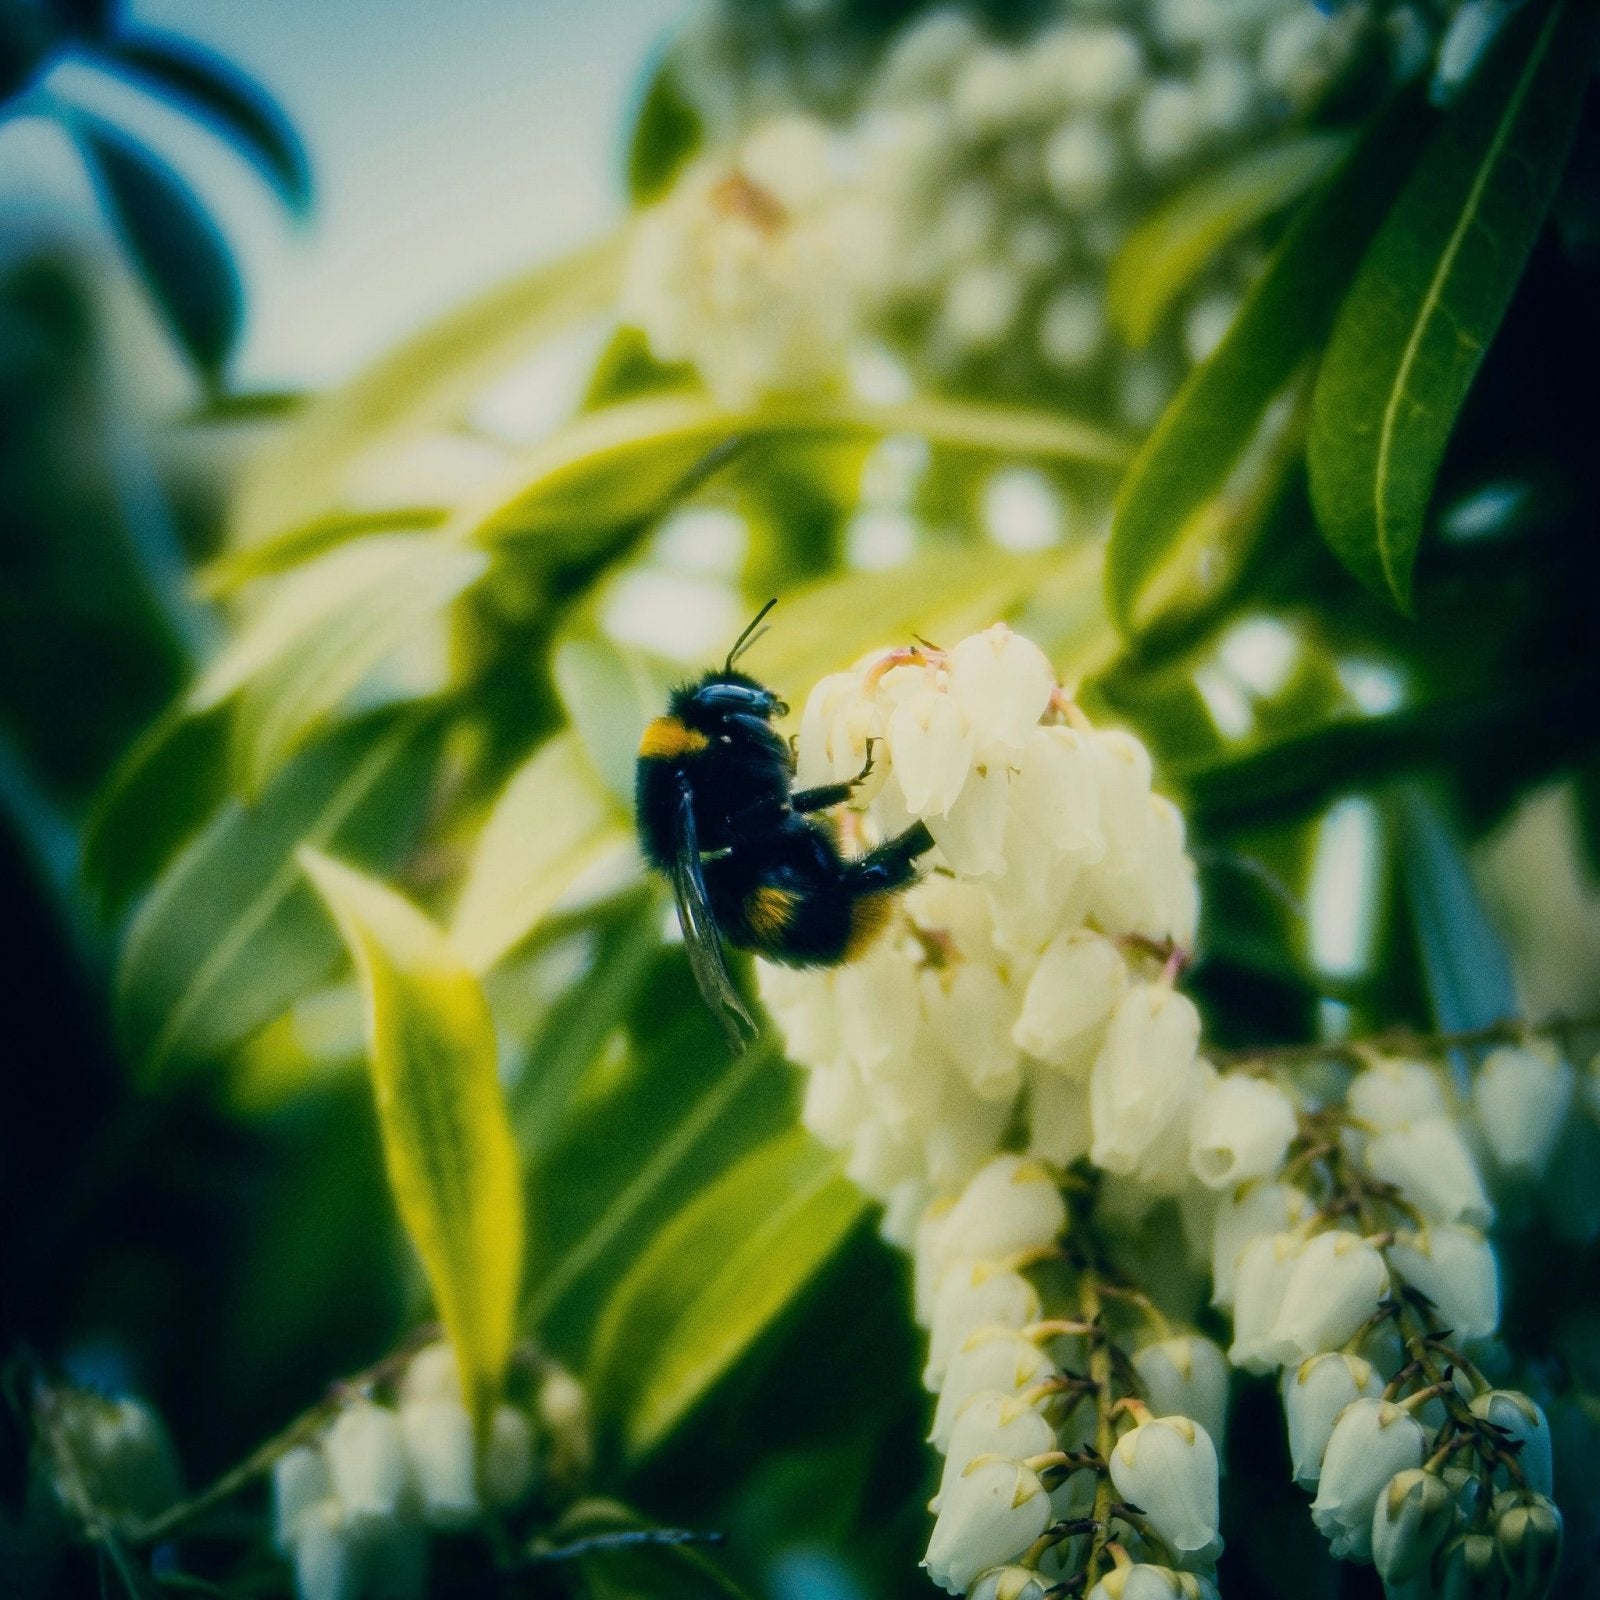 The Pieris And The Bee-Scottish Landscape Photography-Nature Art Gallery-Paintings, Prints, Homeware, Art Gifts From Scotland By Scottish Artist Kevin Hunter